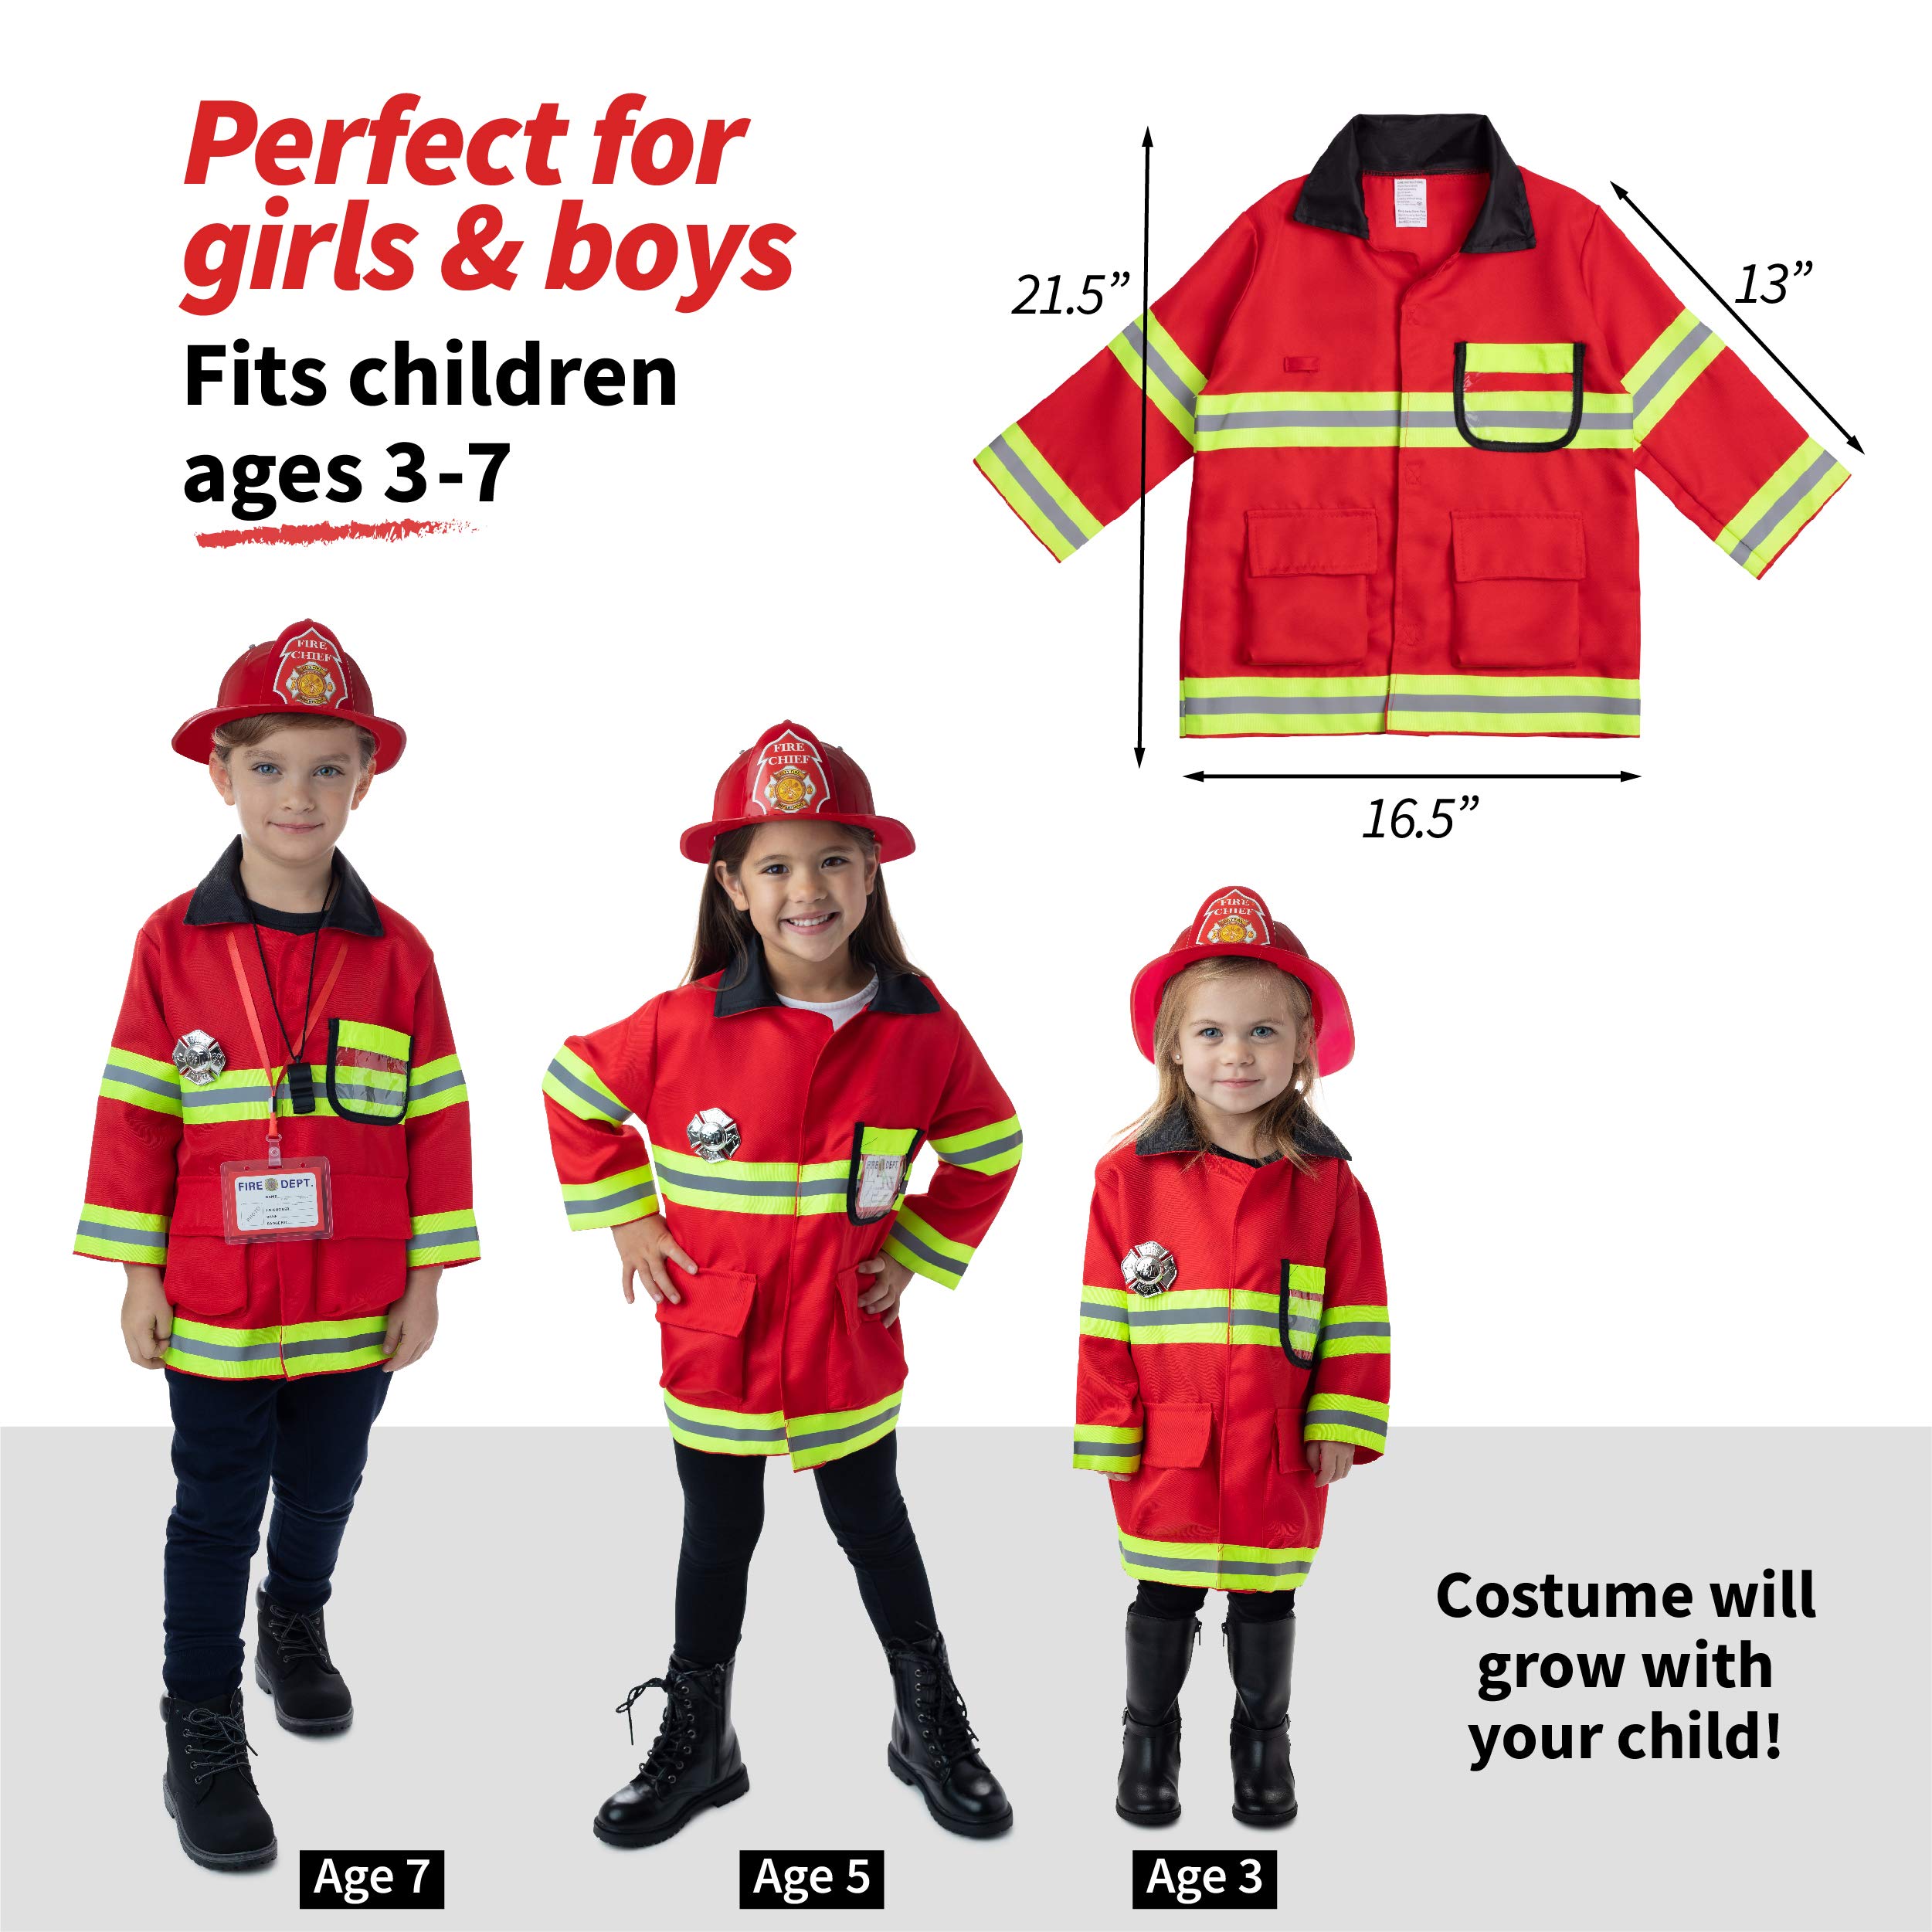 Born Toys 3-in-1 Kids' Dress Up & Pretend Play Set-Kids Pirate Costume, Kids Ninja Costume & Astronaut and Fireman Costume for Kids Ages 3-7